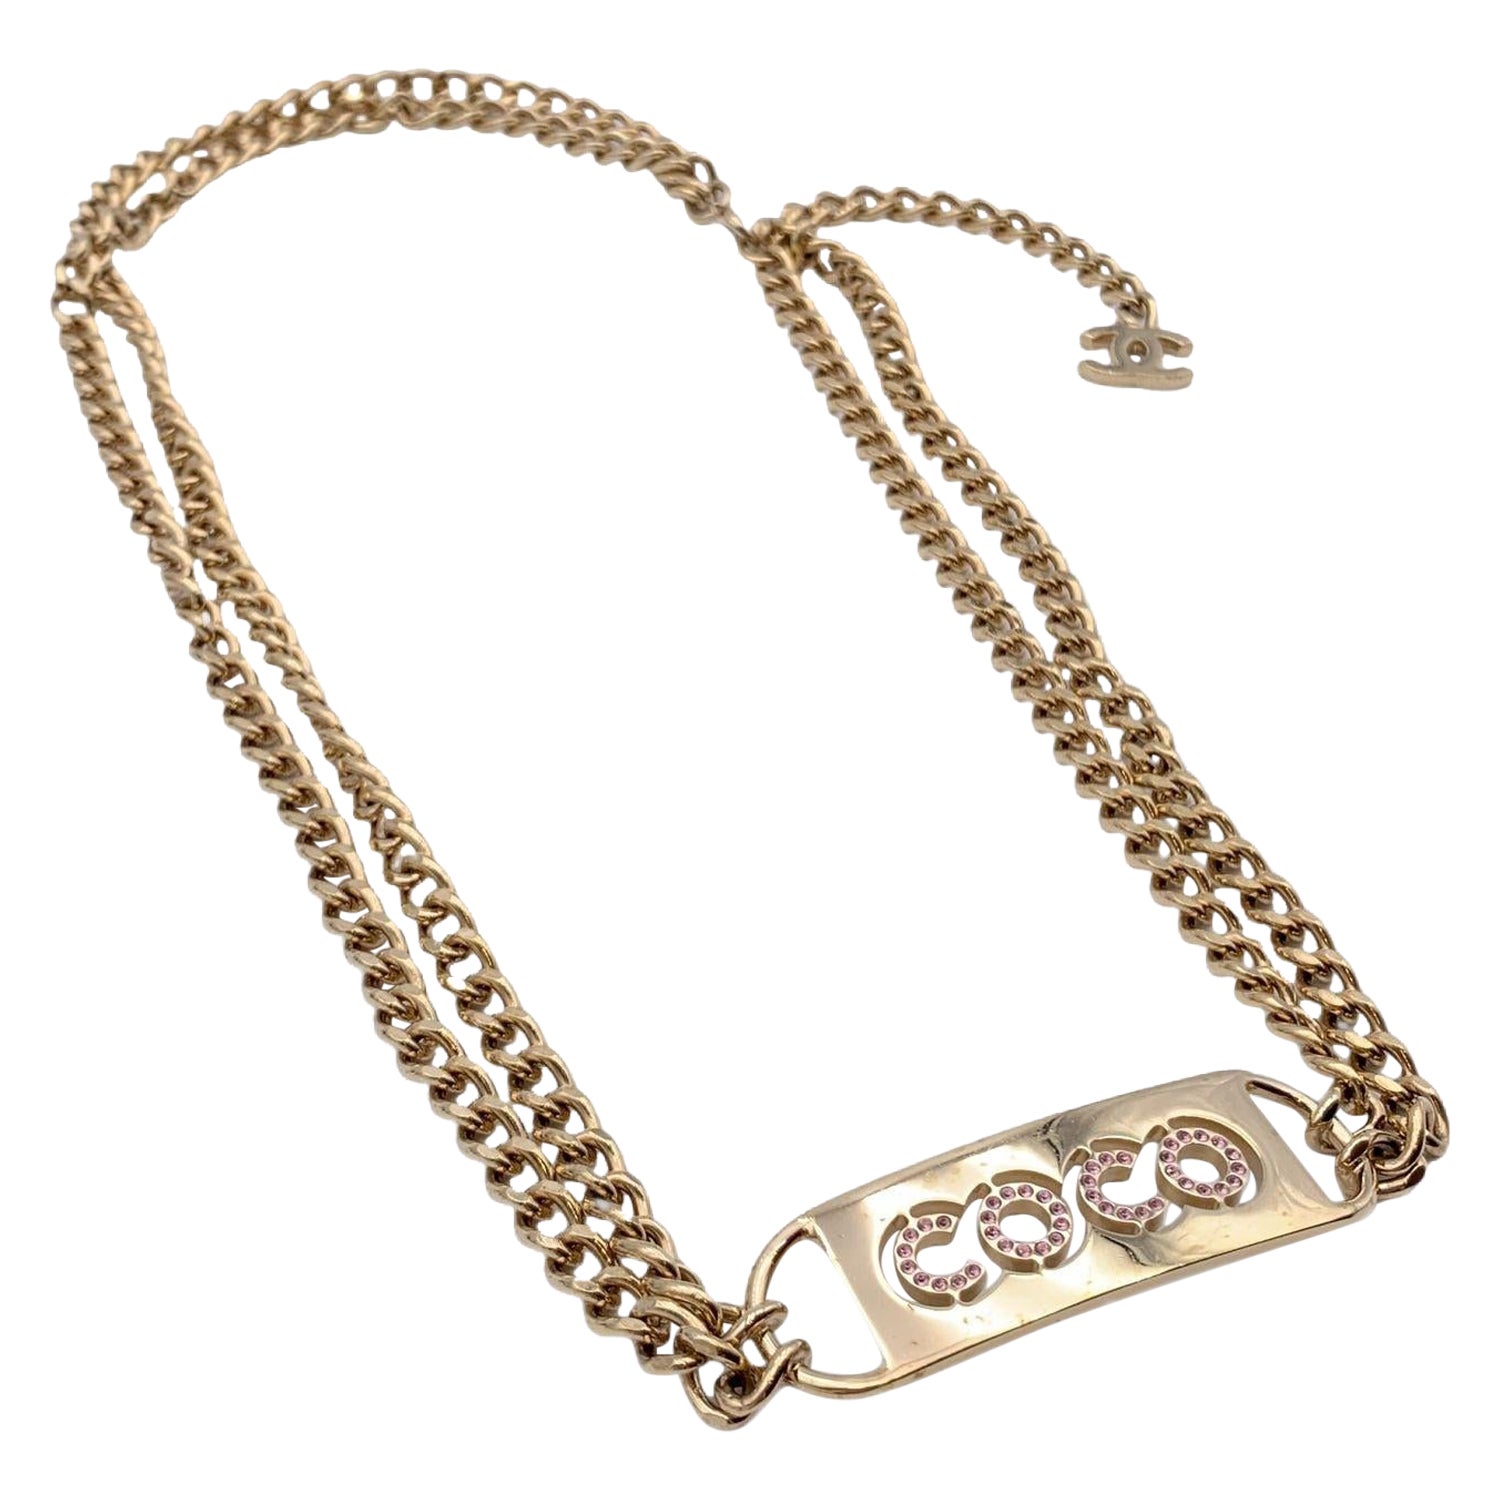 Chanel Vintage Gold Metal Chain Coco Crystals Belt or Necklace